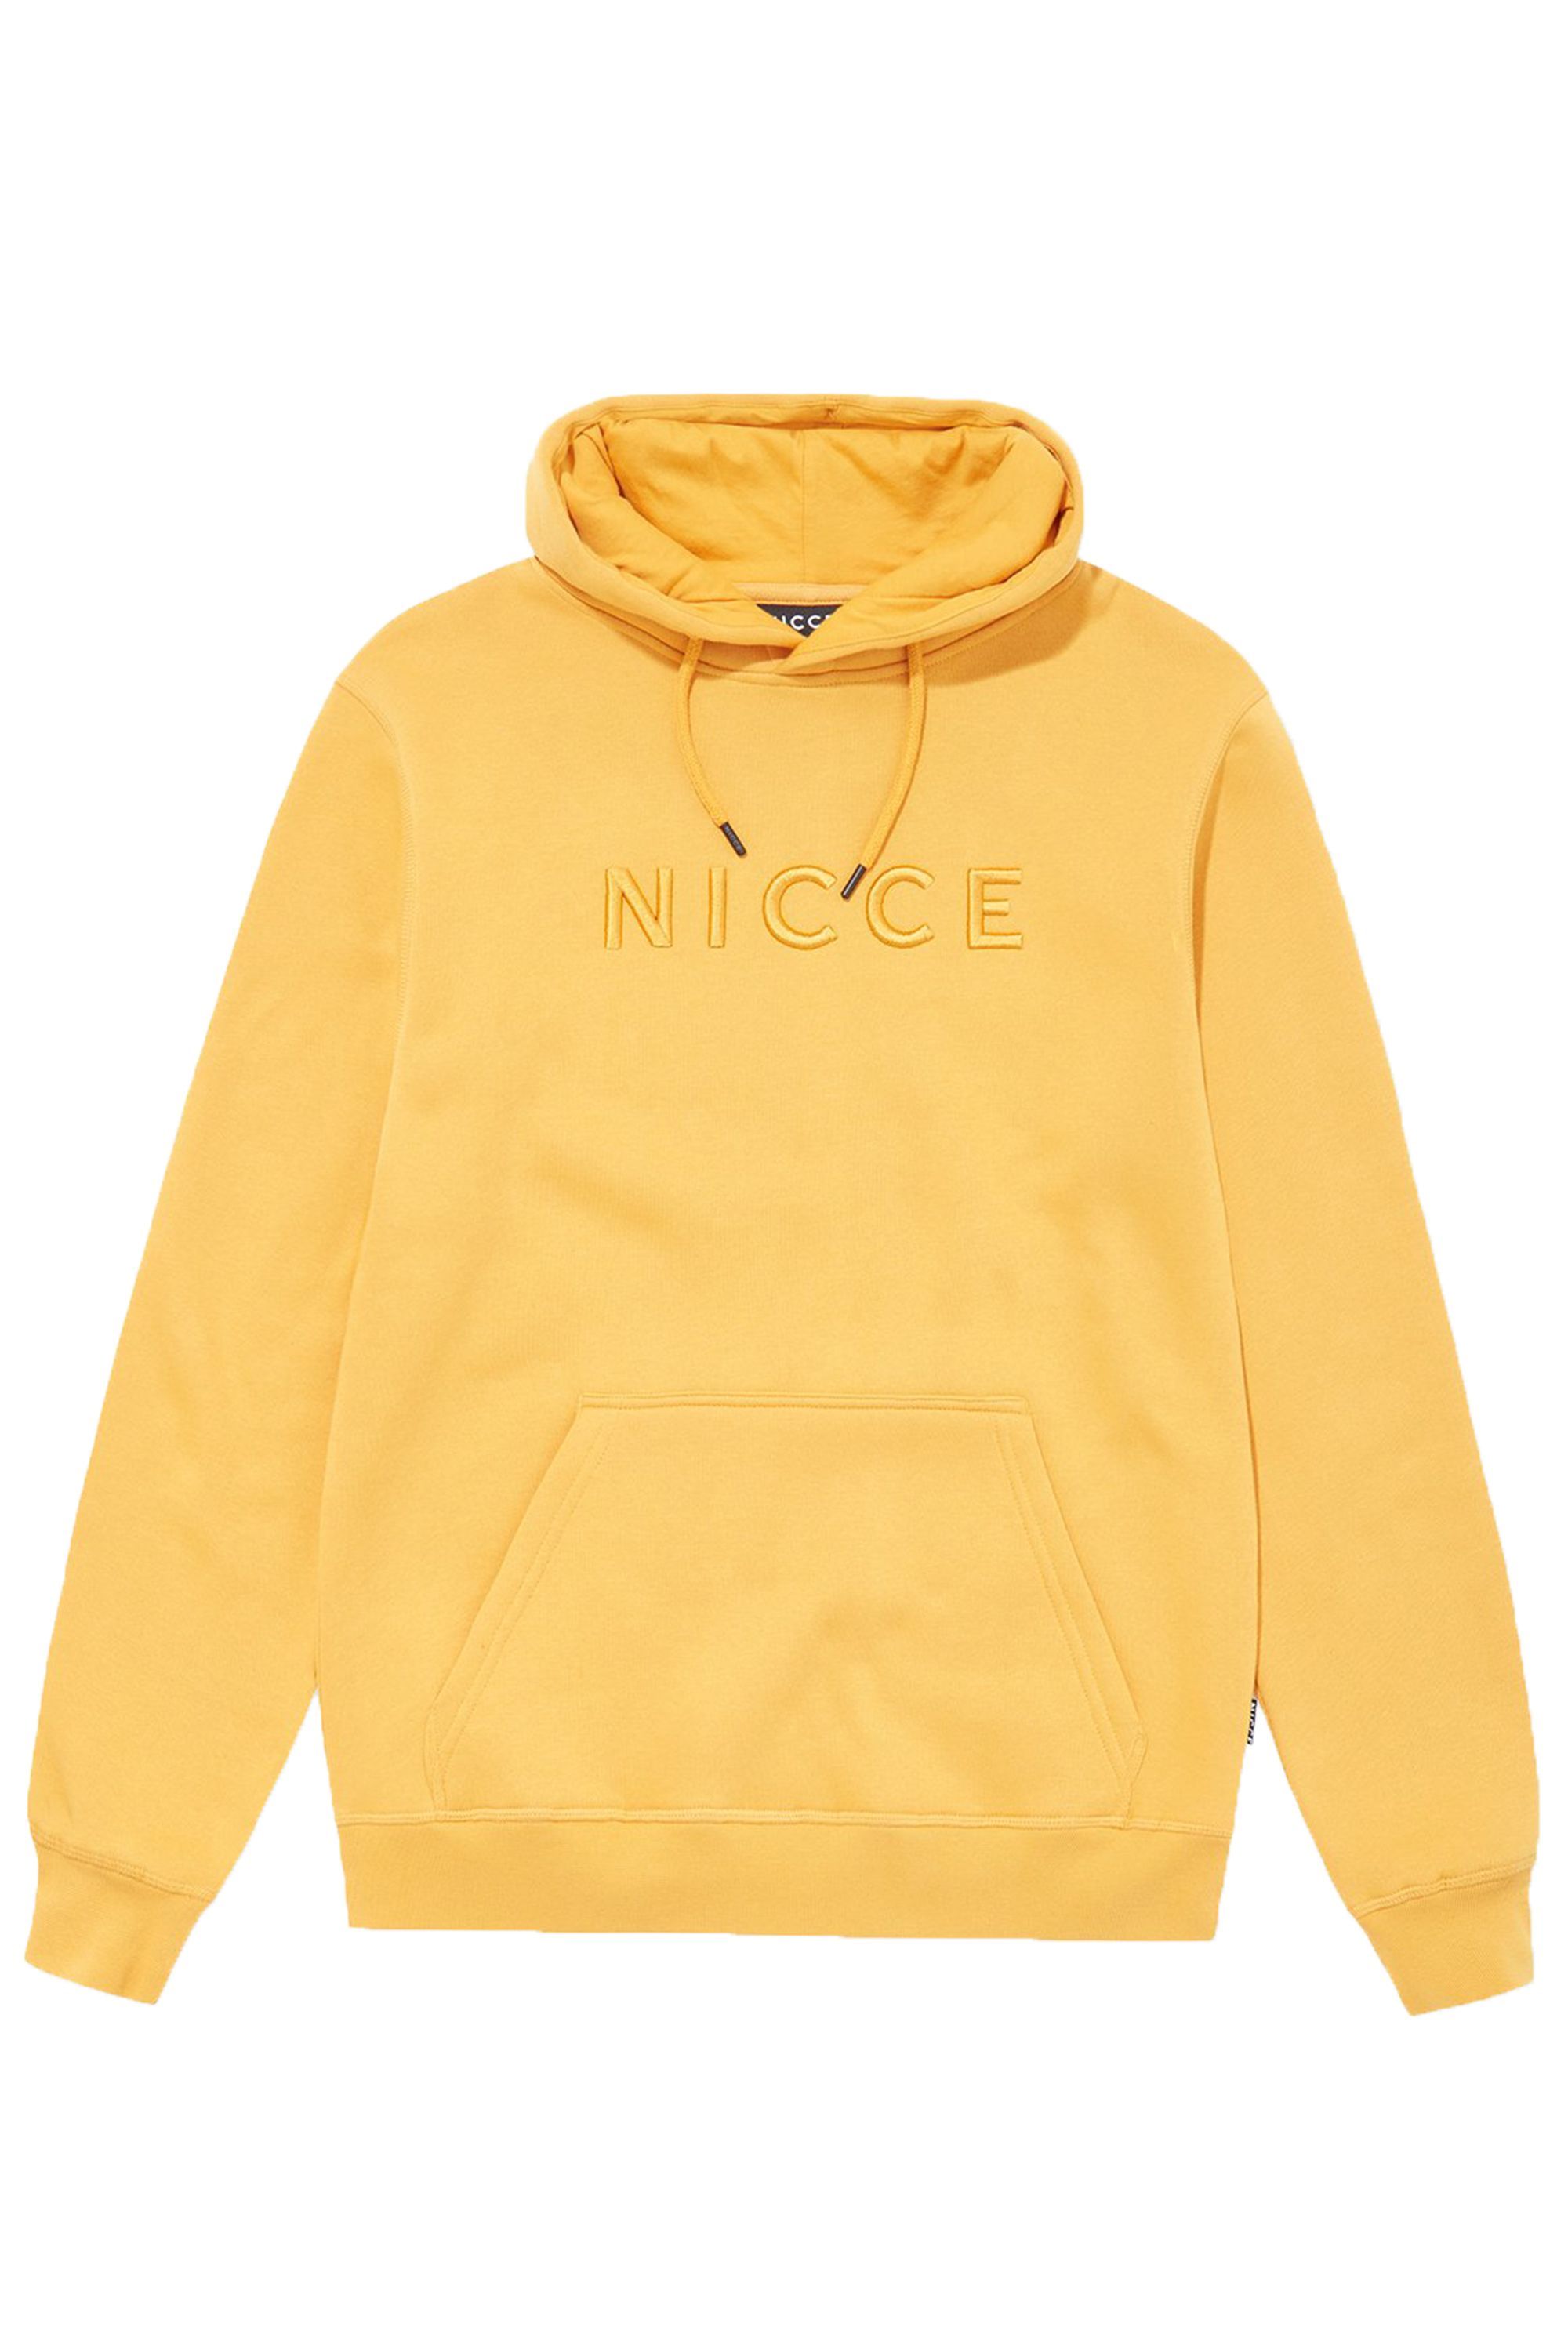 10 Hoodies That Are Better Than Your 